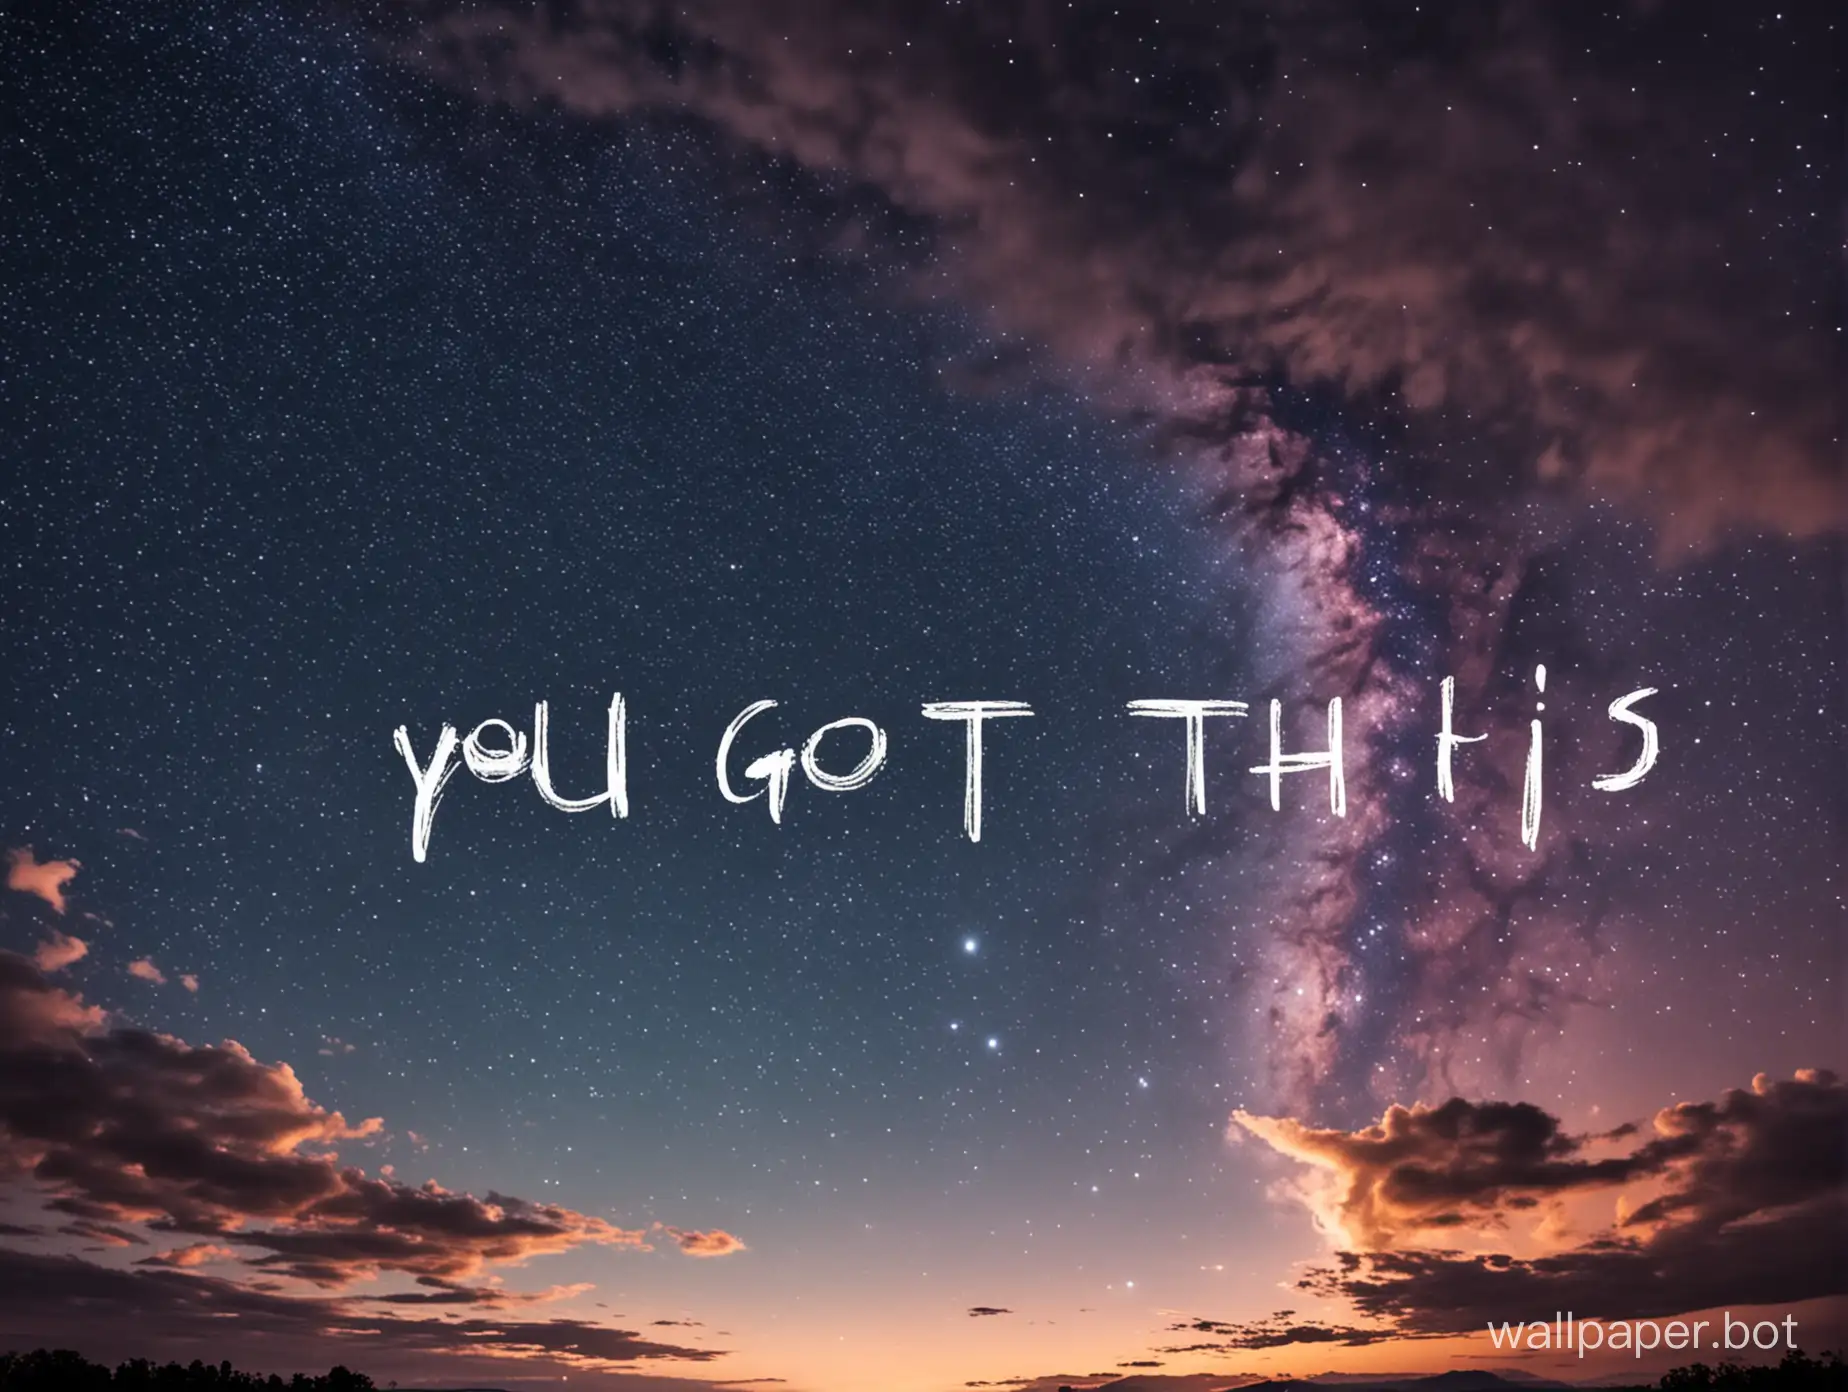 Beautiful night sky , add this big bold text "You got this"
Make the text more readable and no typo in it